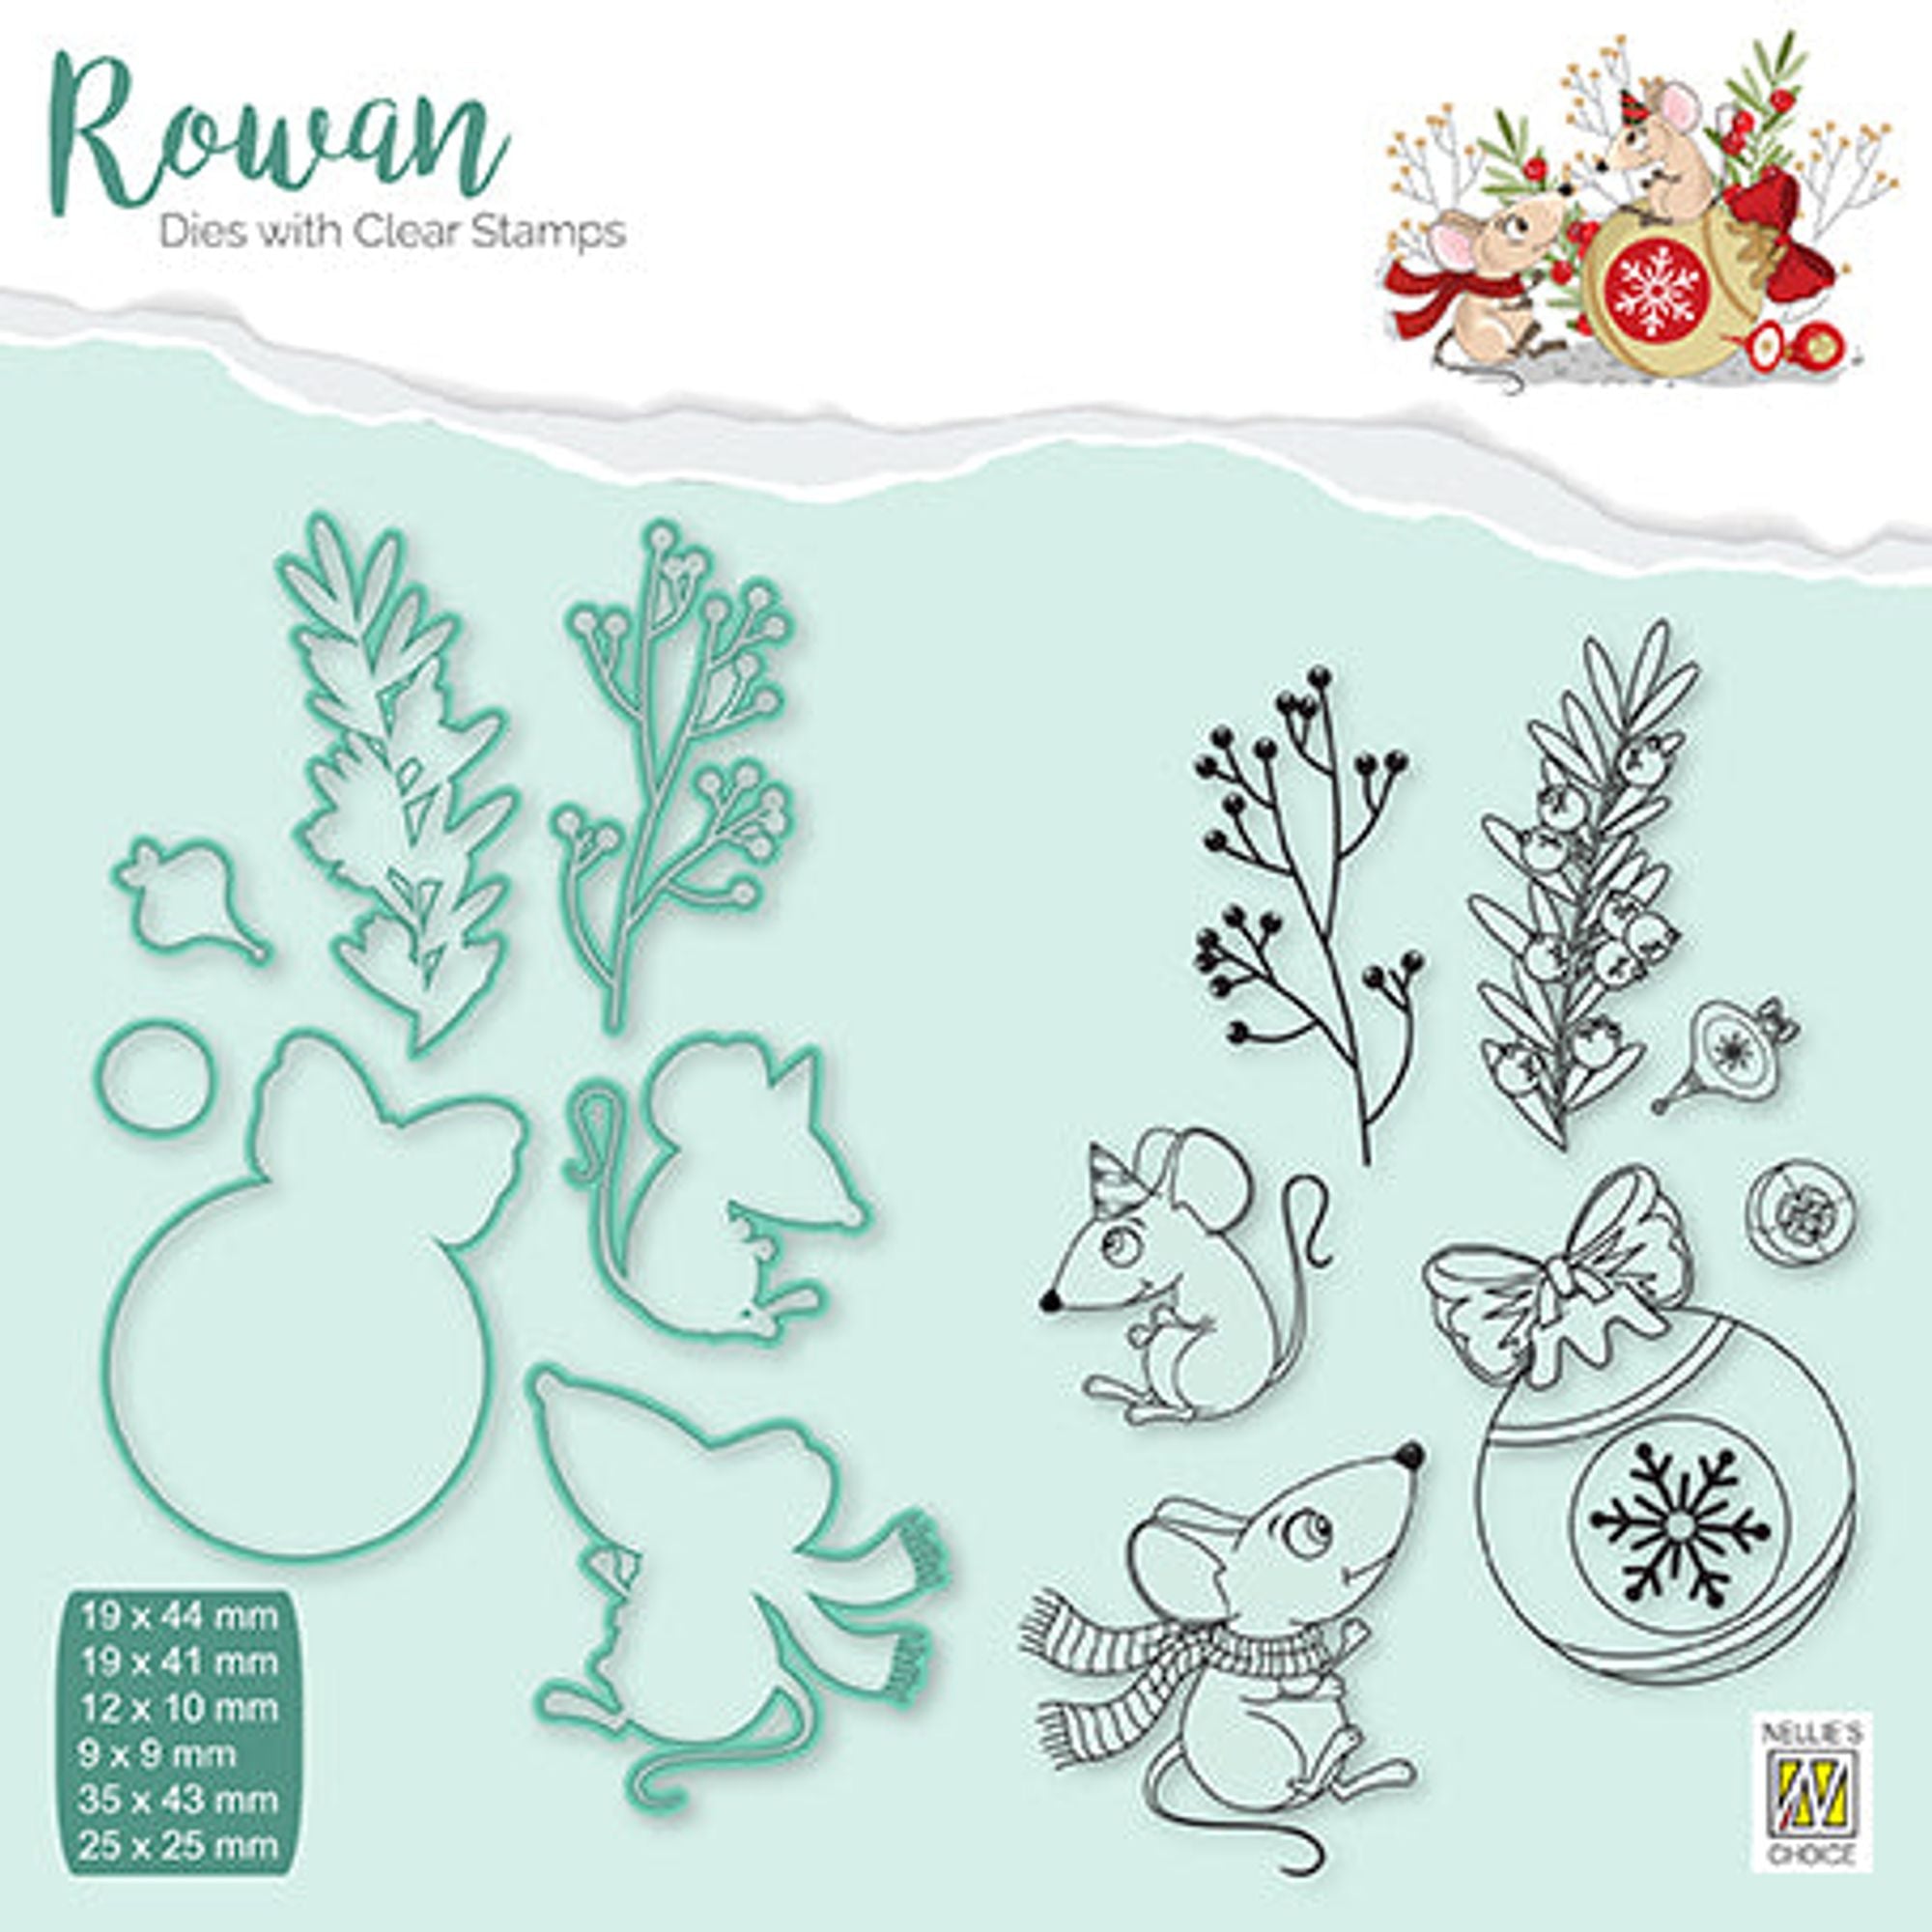 Rowan Dies with Clear Stamps Christmas Mouse 1 Christmas Bauble